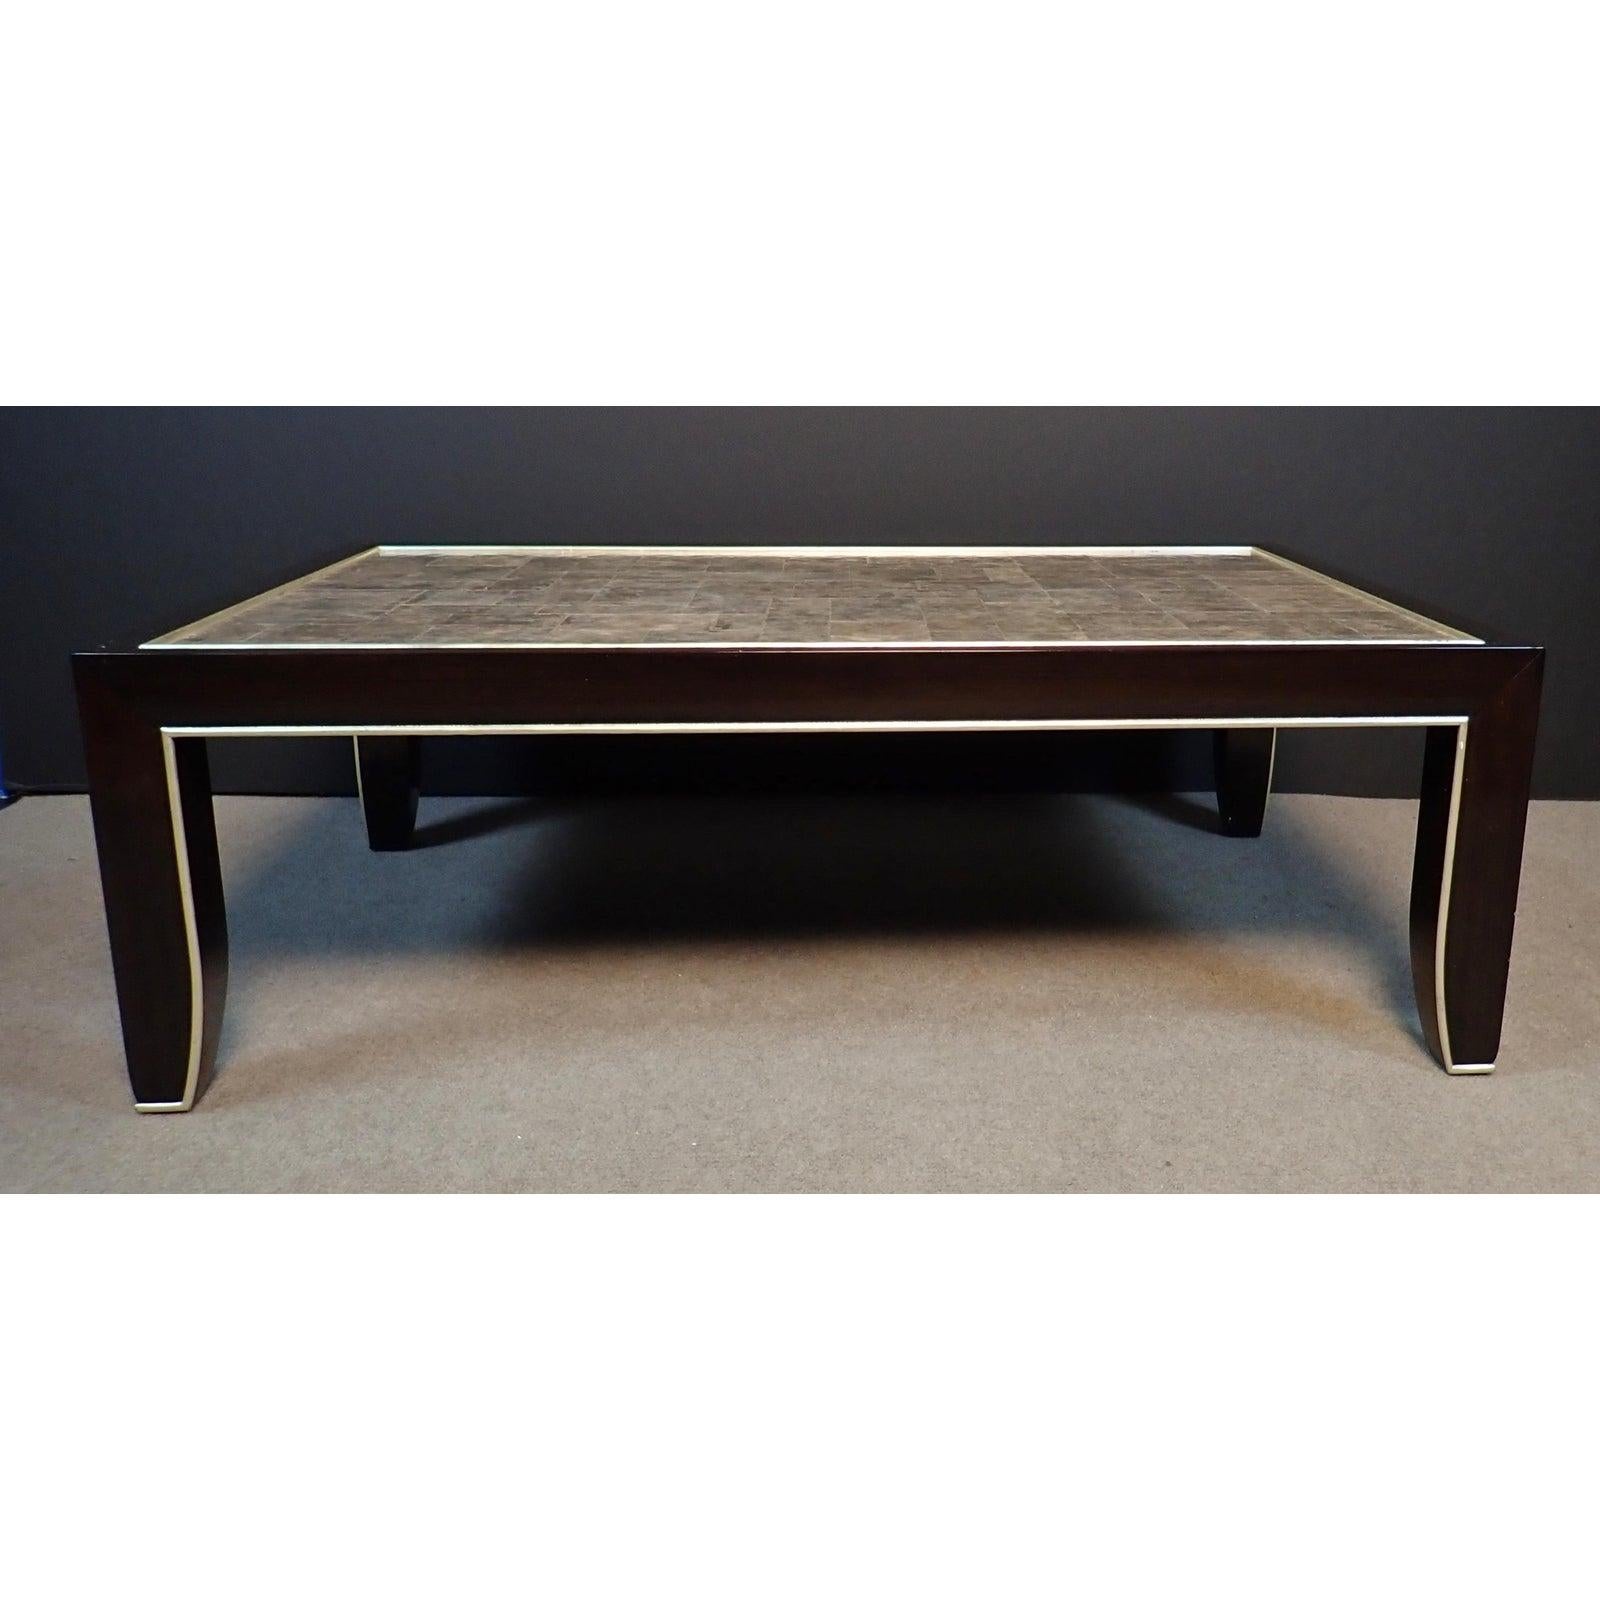  Mica and lacquered Art Deco inspired wood coffee table. Beautiful Mica top modern cocktail table with clean lines. Brown-black painted finish with silver leaf trim.